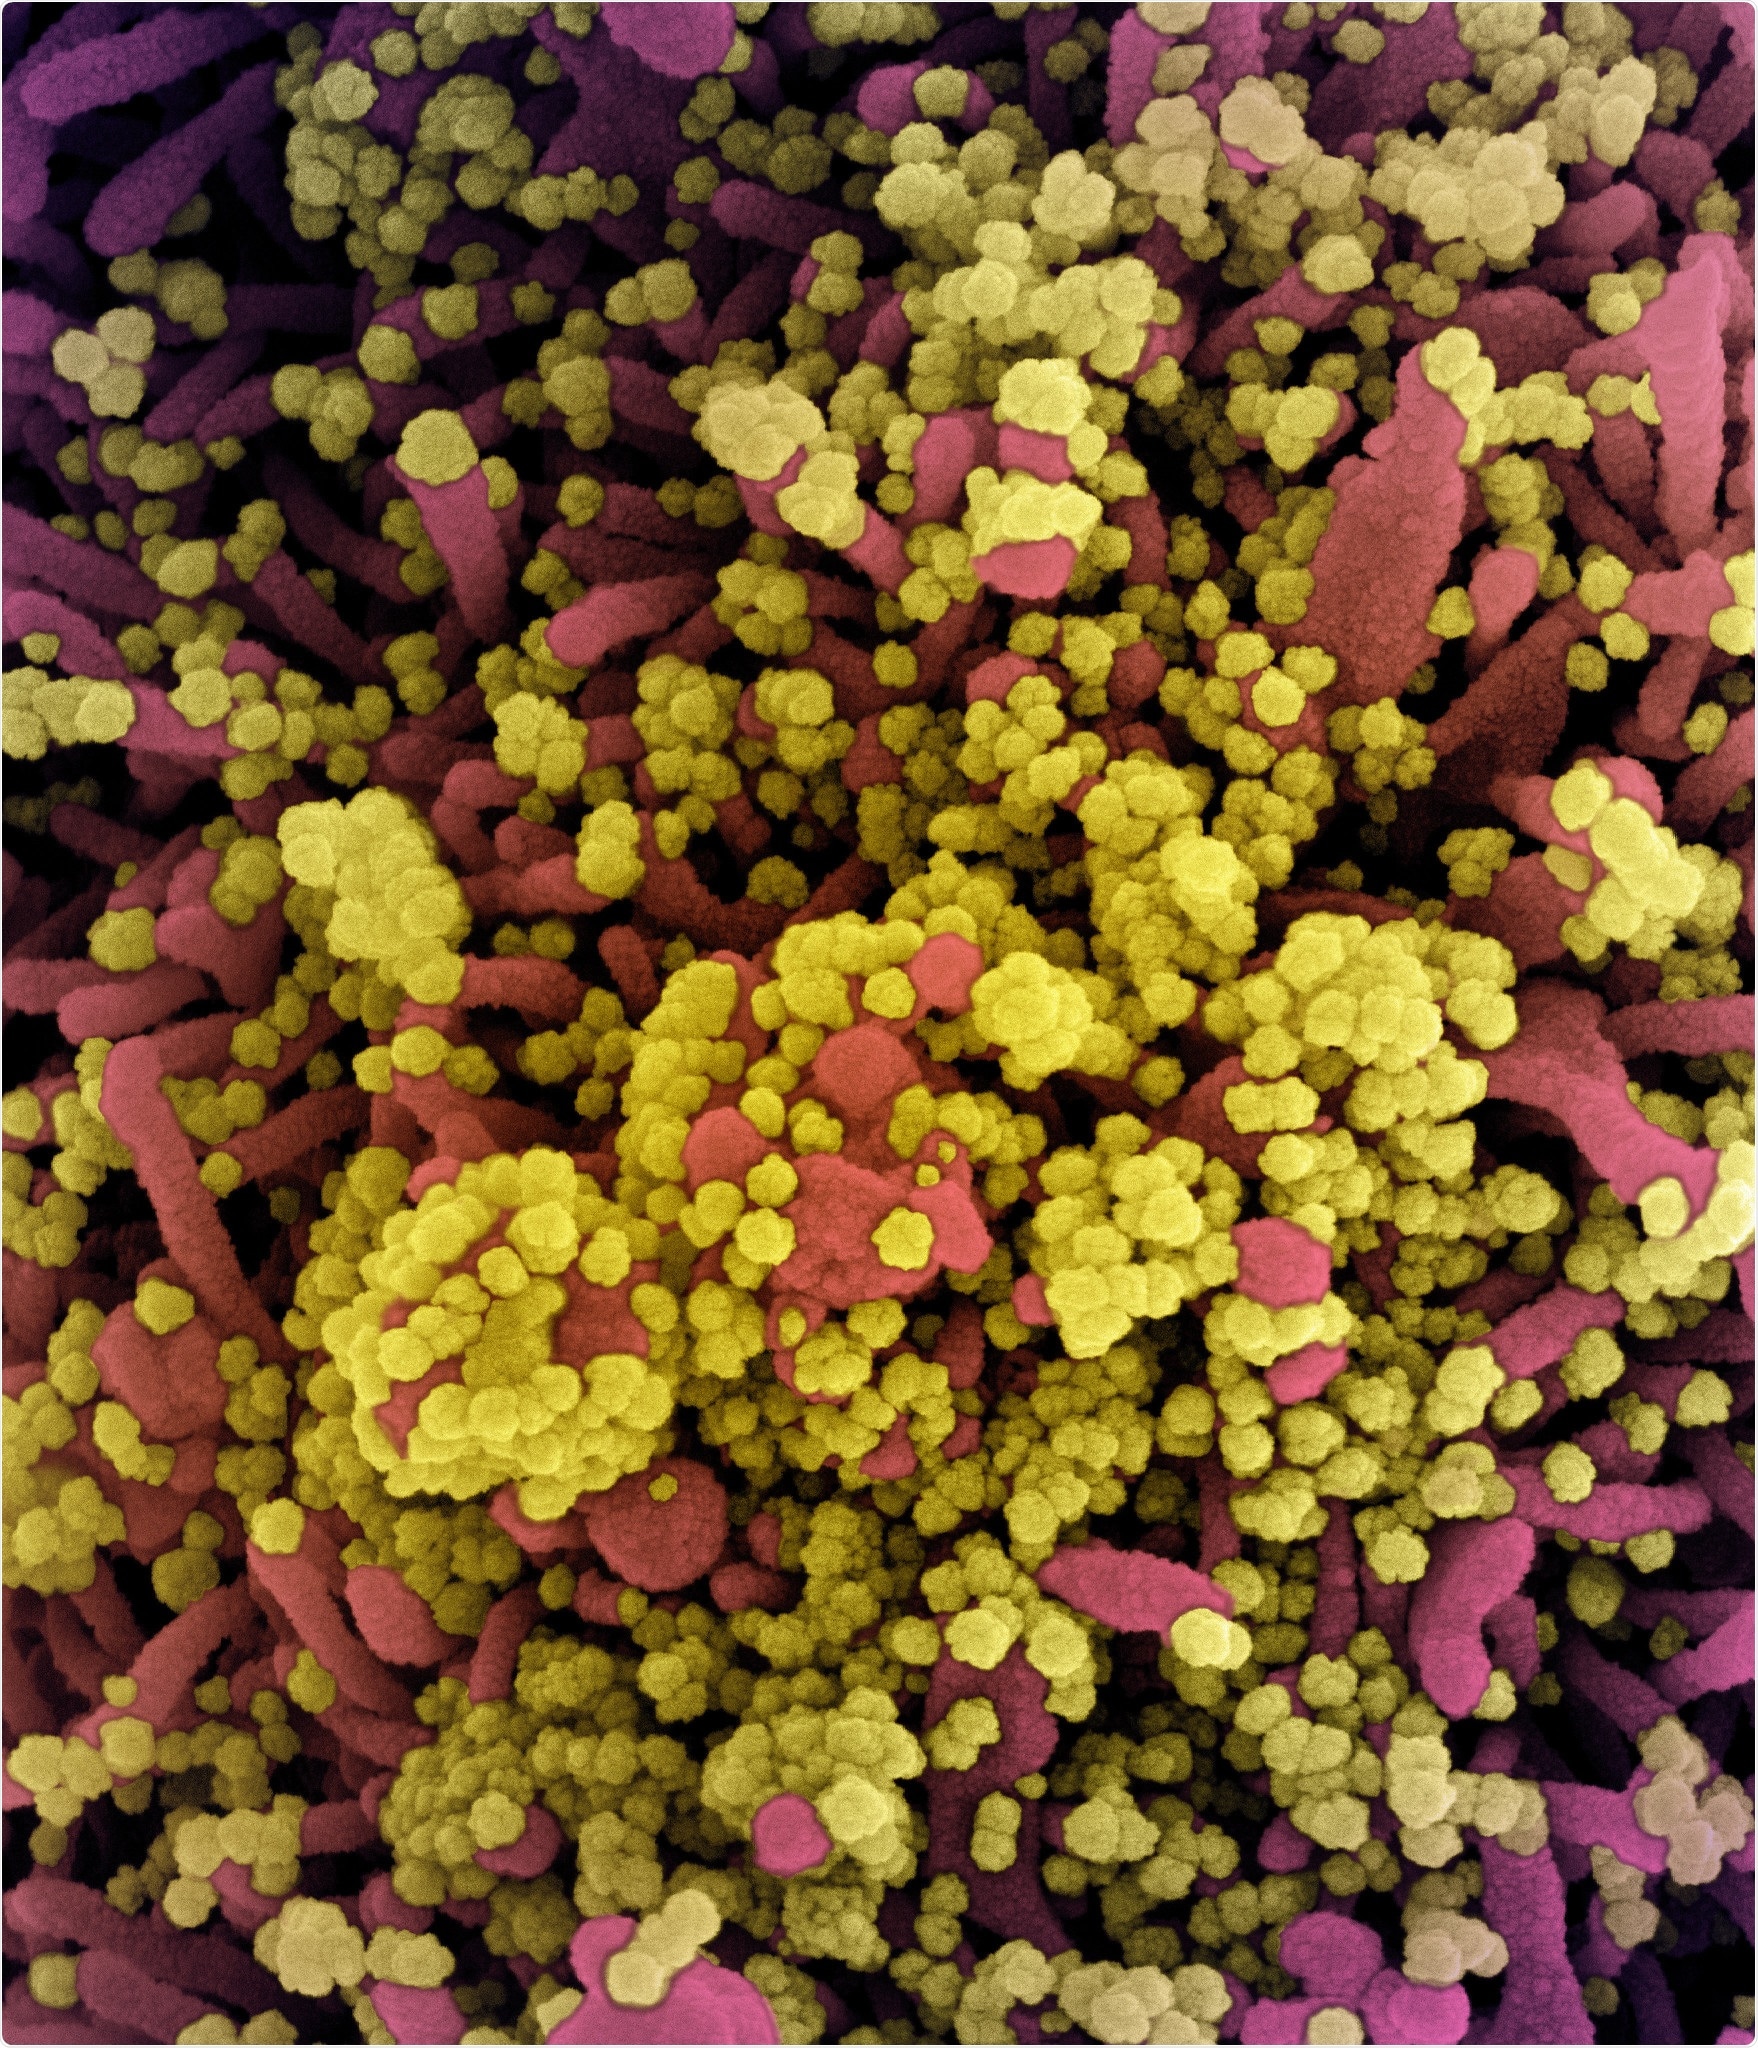 Novel Coronavirus SARS-CoV-2 Colorized scanning electron micrograph of a cell heavily infected with SARS-CoV-2 virus particles (yellow), isolated from a patient sample. Image captured at the NIAID Integrated Research Facility (IRF) in Fort Detrick, Maryland. Credit: NIAID